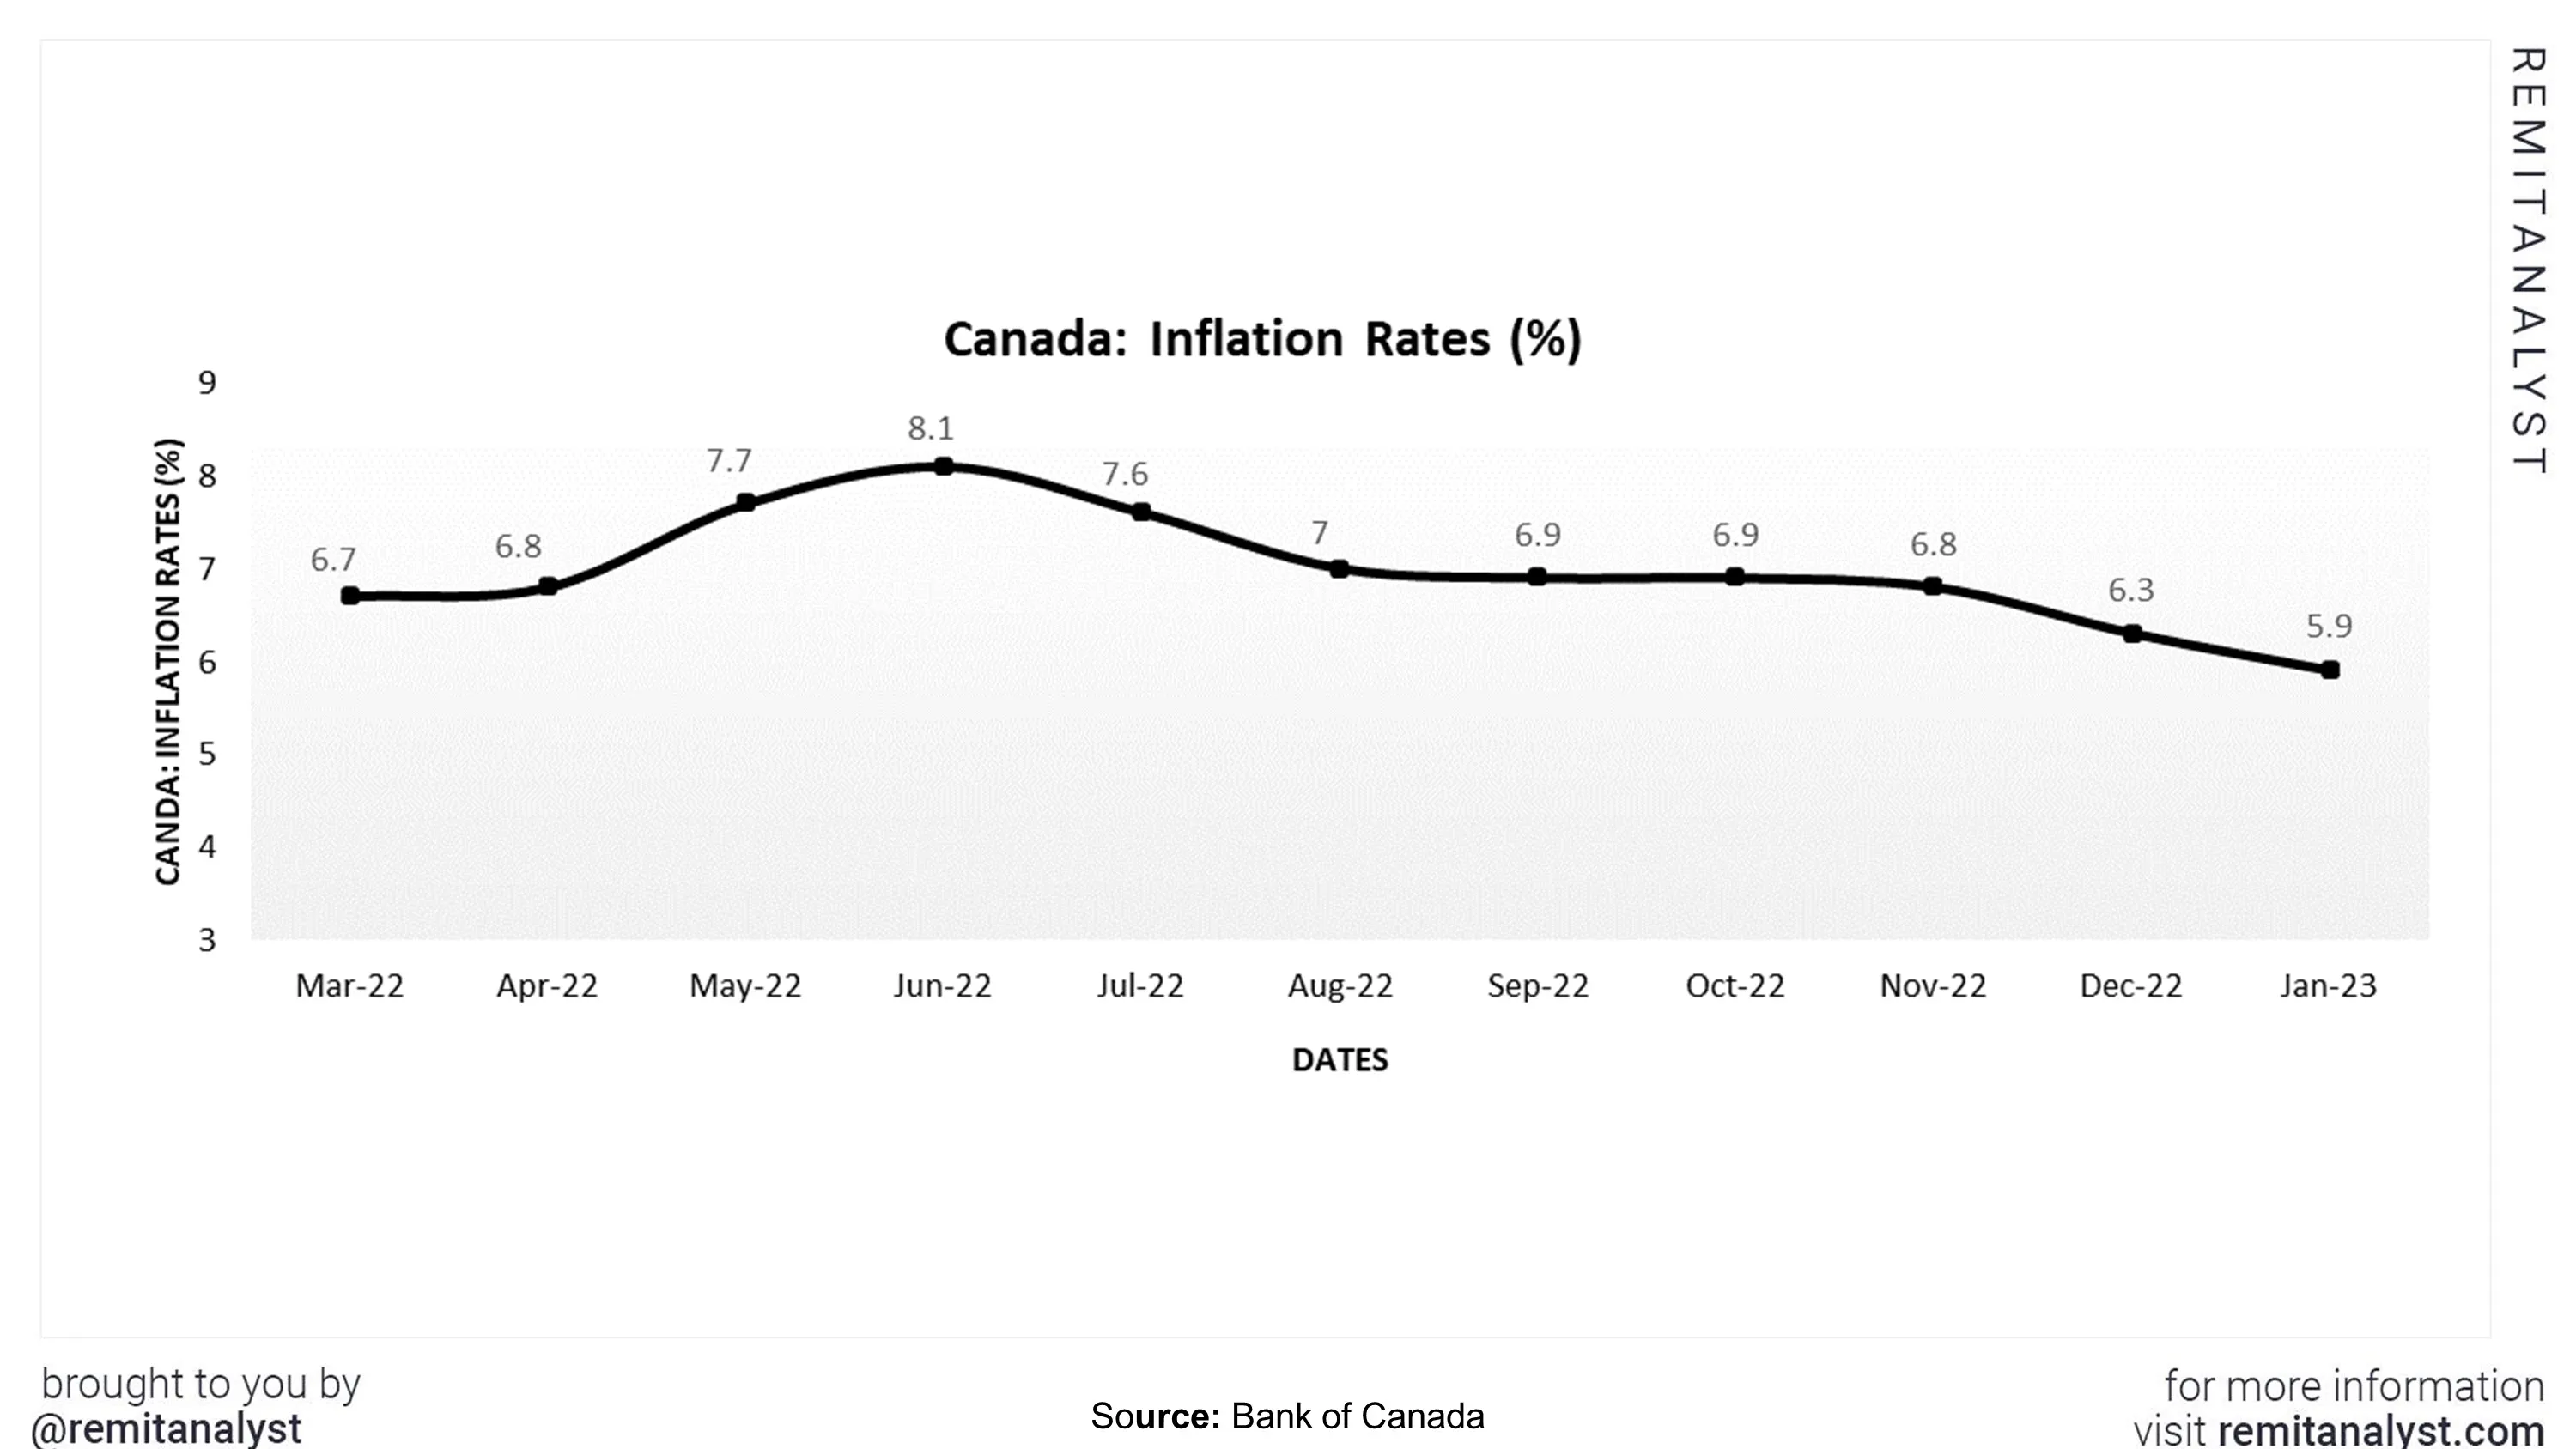 inflation-rates-canada-from-mar-2022-to-jan-2023